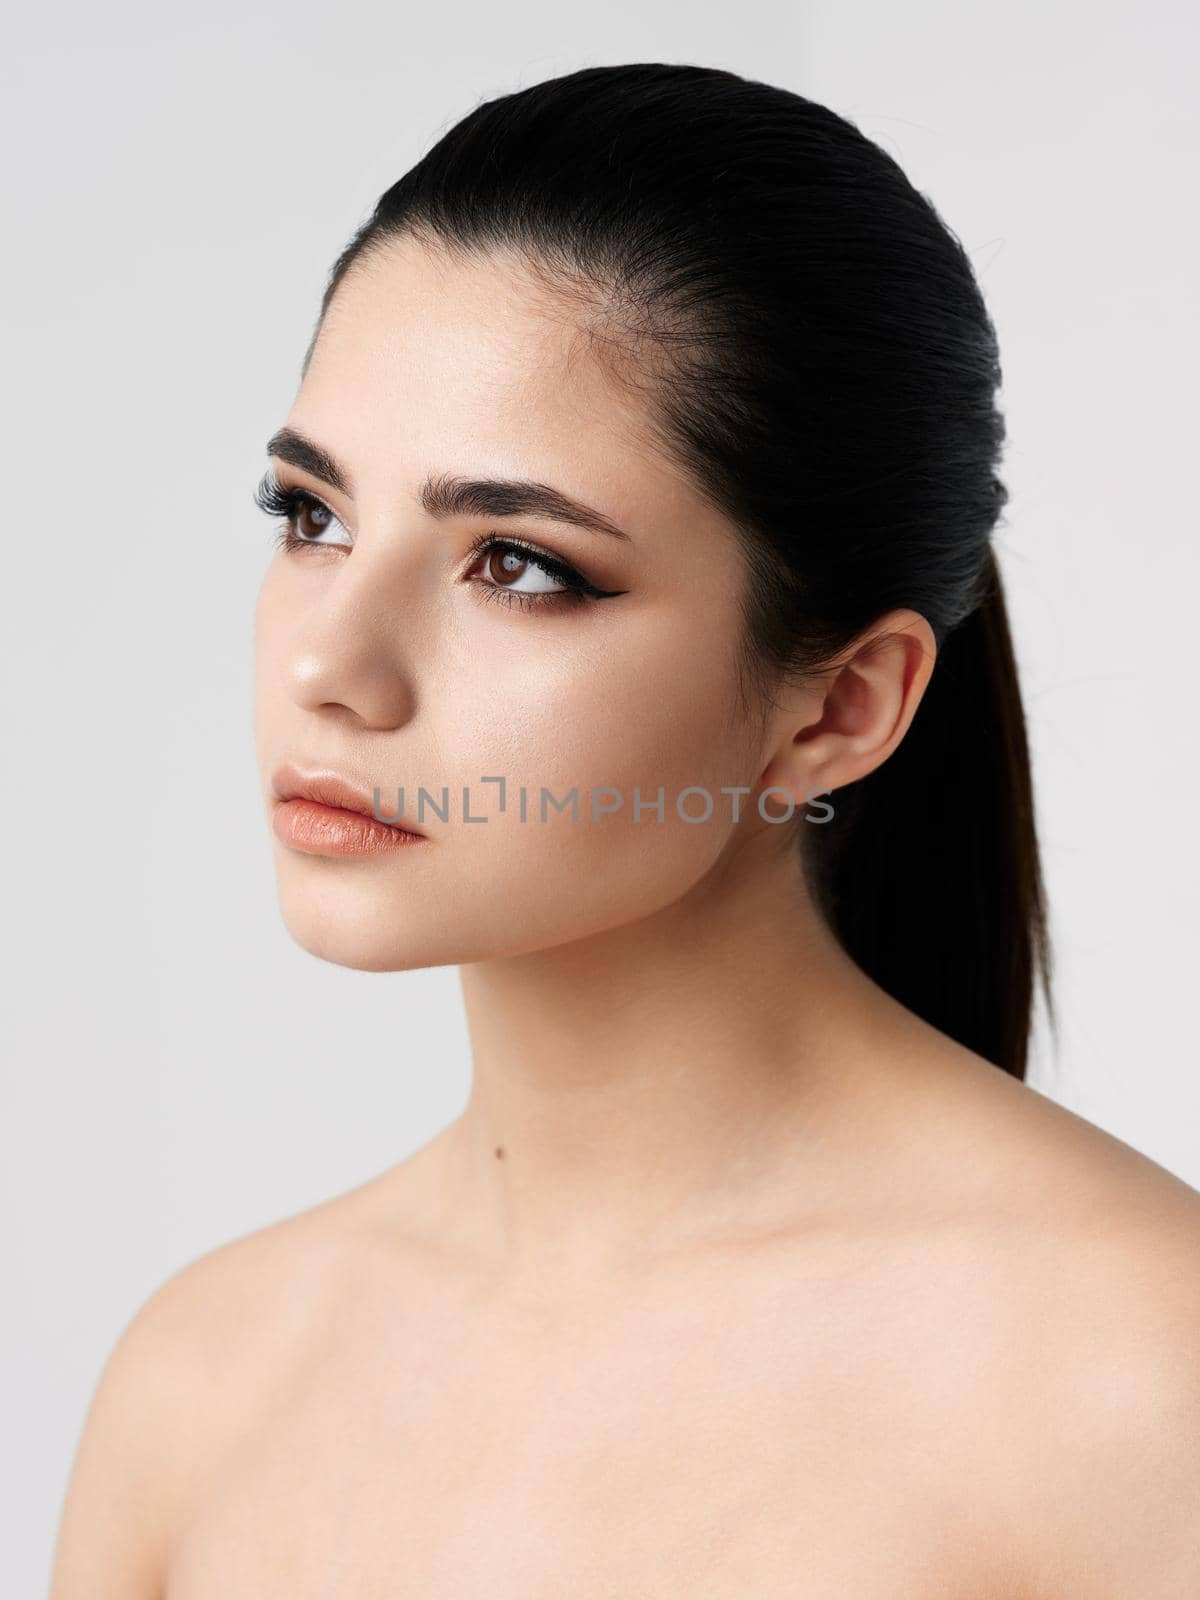 woman looking to the side naked shoulders makeup skin care by SHOTPRIME